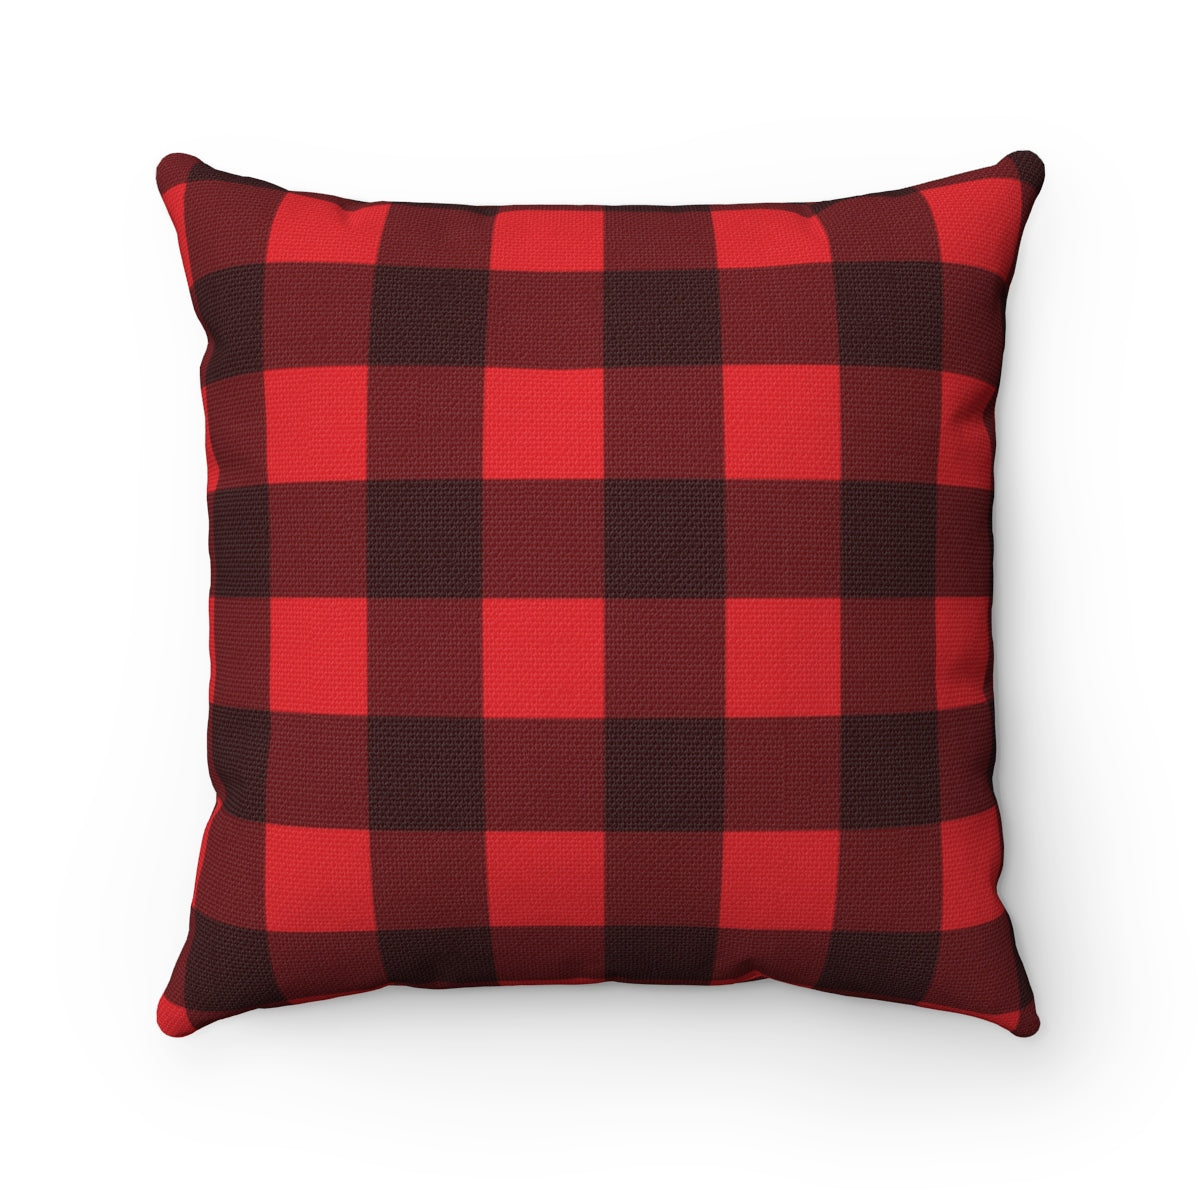 Buffalo Plaid Pillow Case, Square Red and Black Check Throw Decorative Cover Starcove Fashion